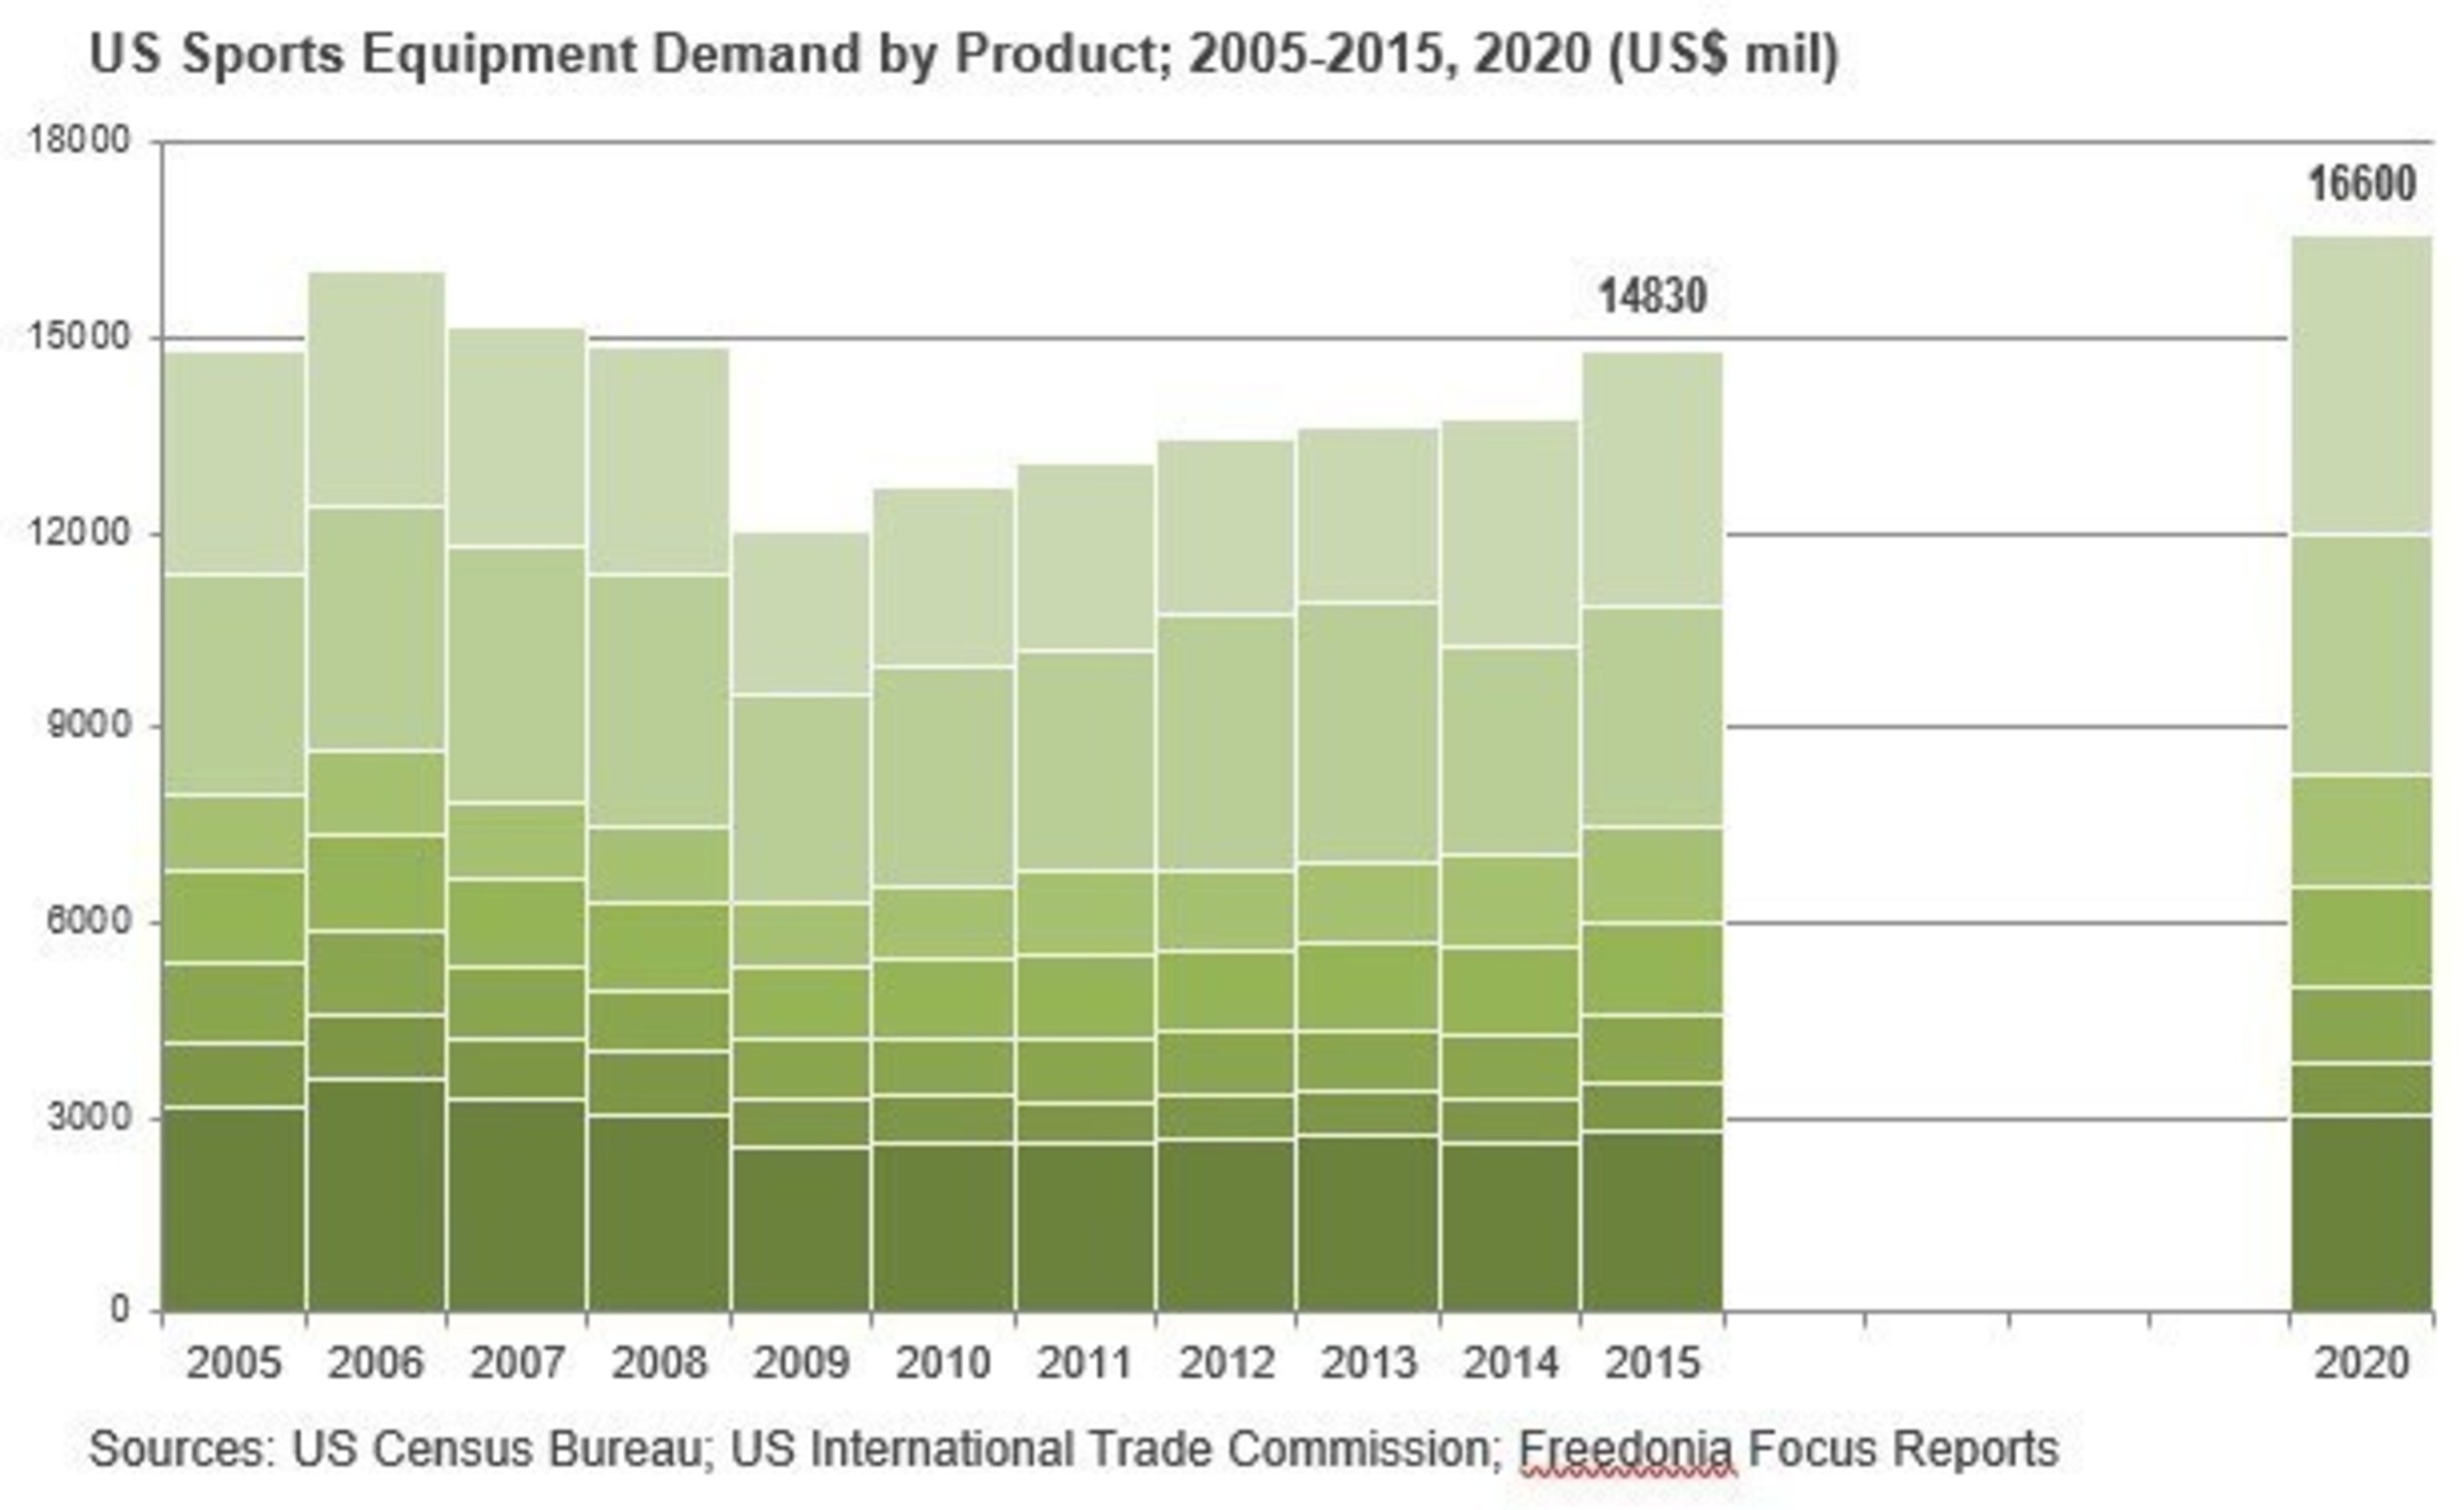 US Sports Equipment Demand by Product